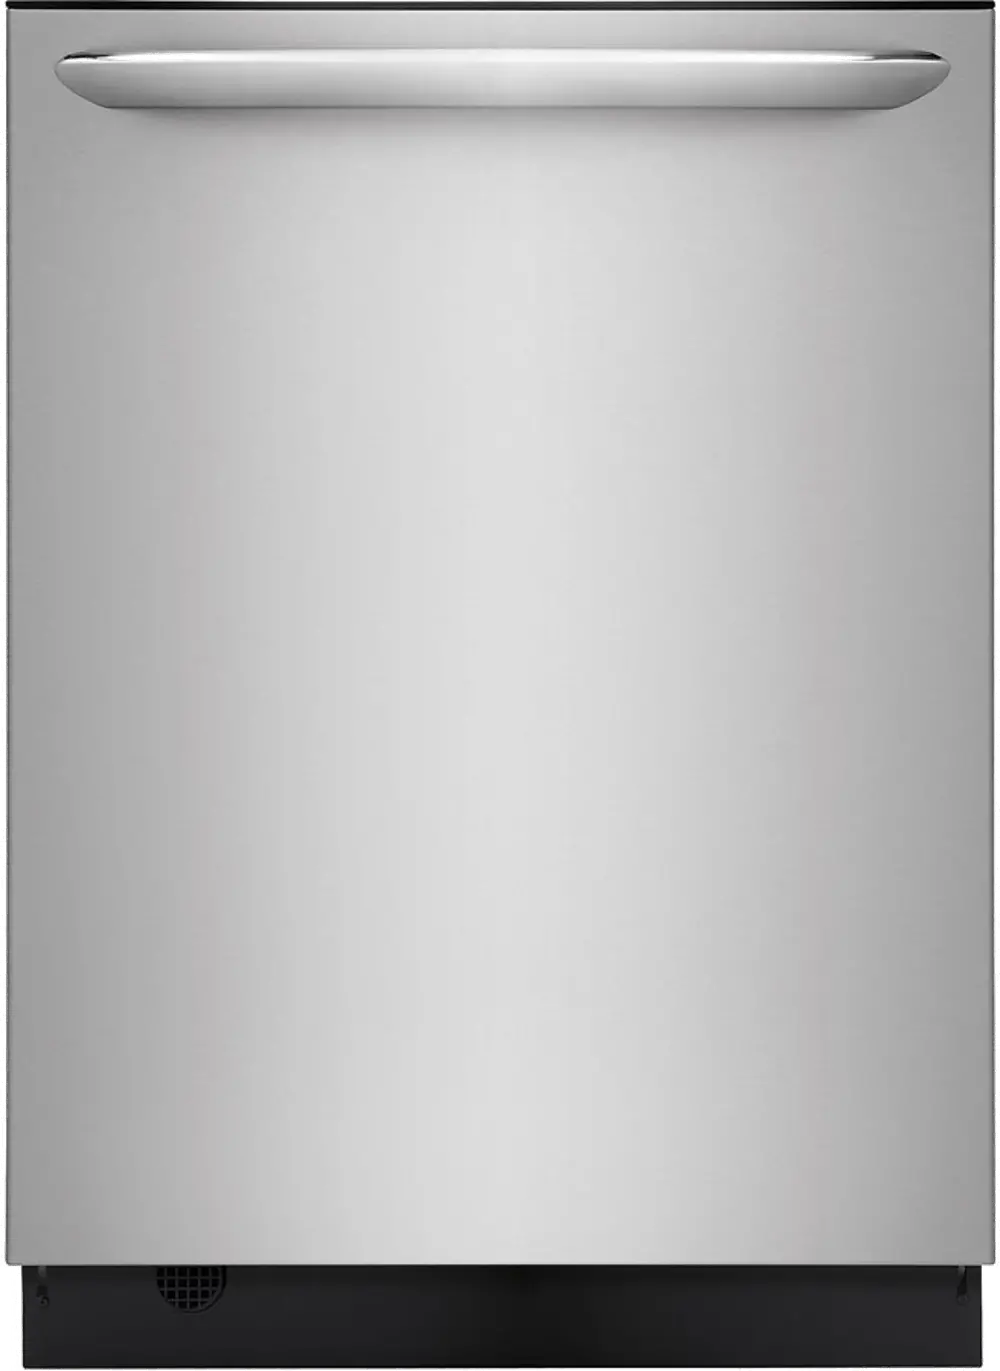 LGID2478SF Frigidaire Gallery 24 inch Built-In Dishwasher - Stainless Steel-1